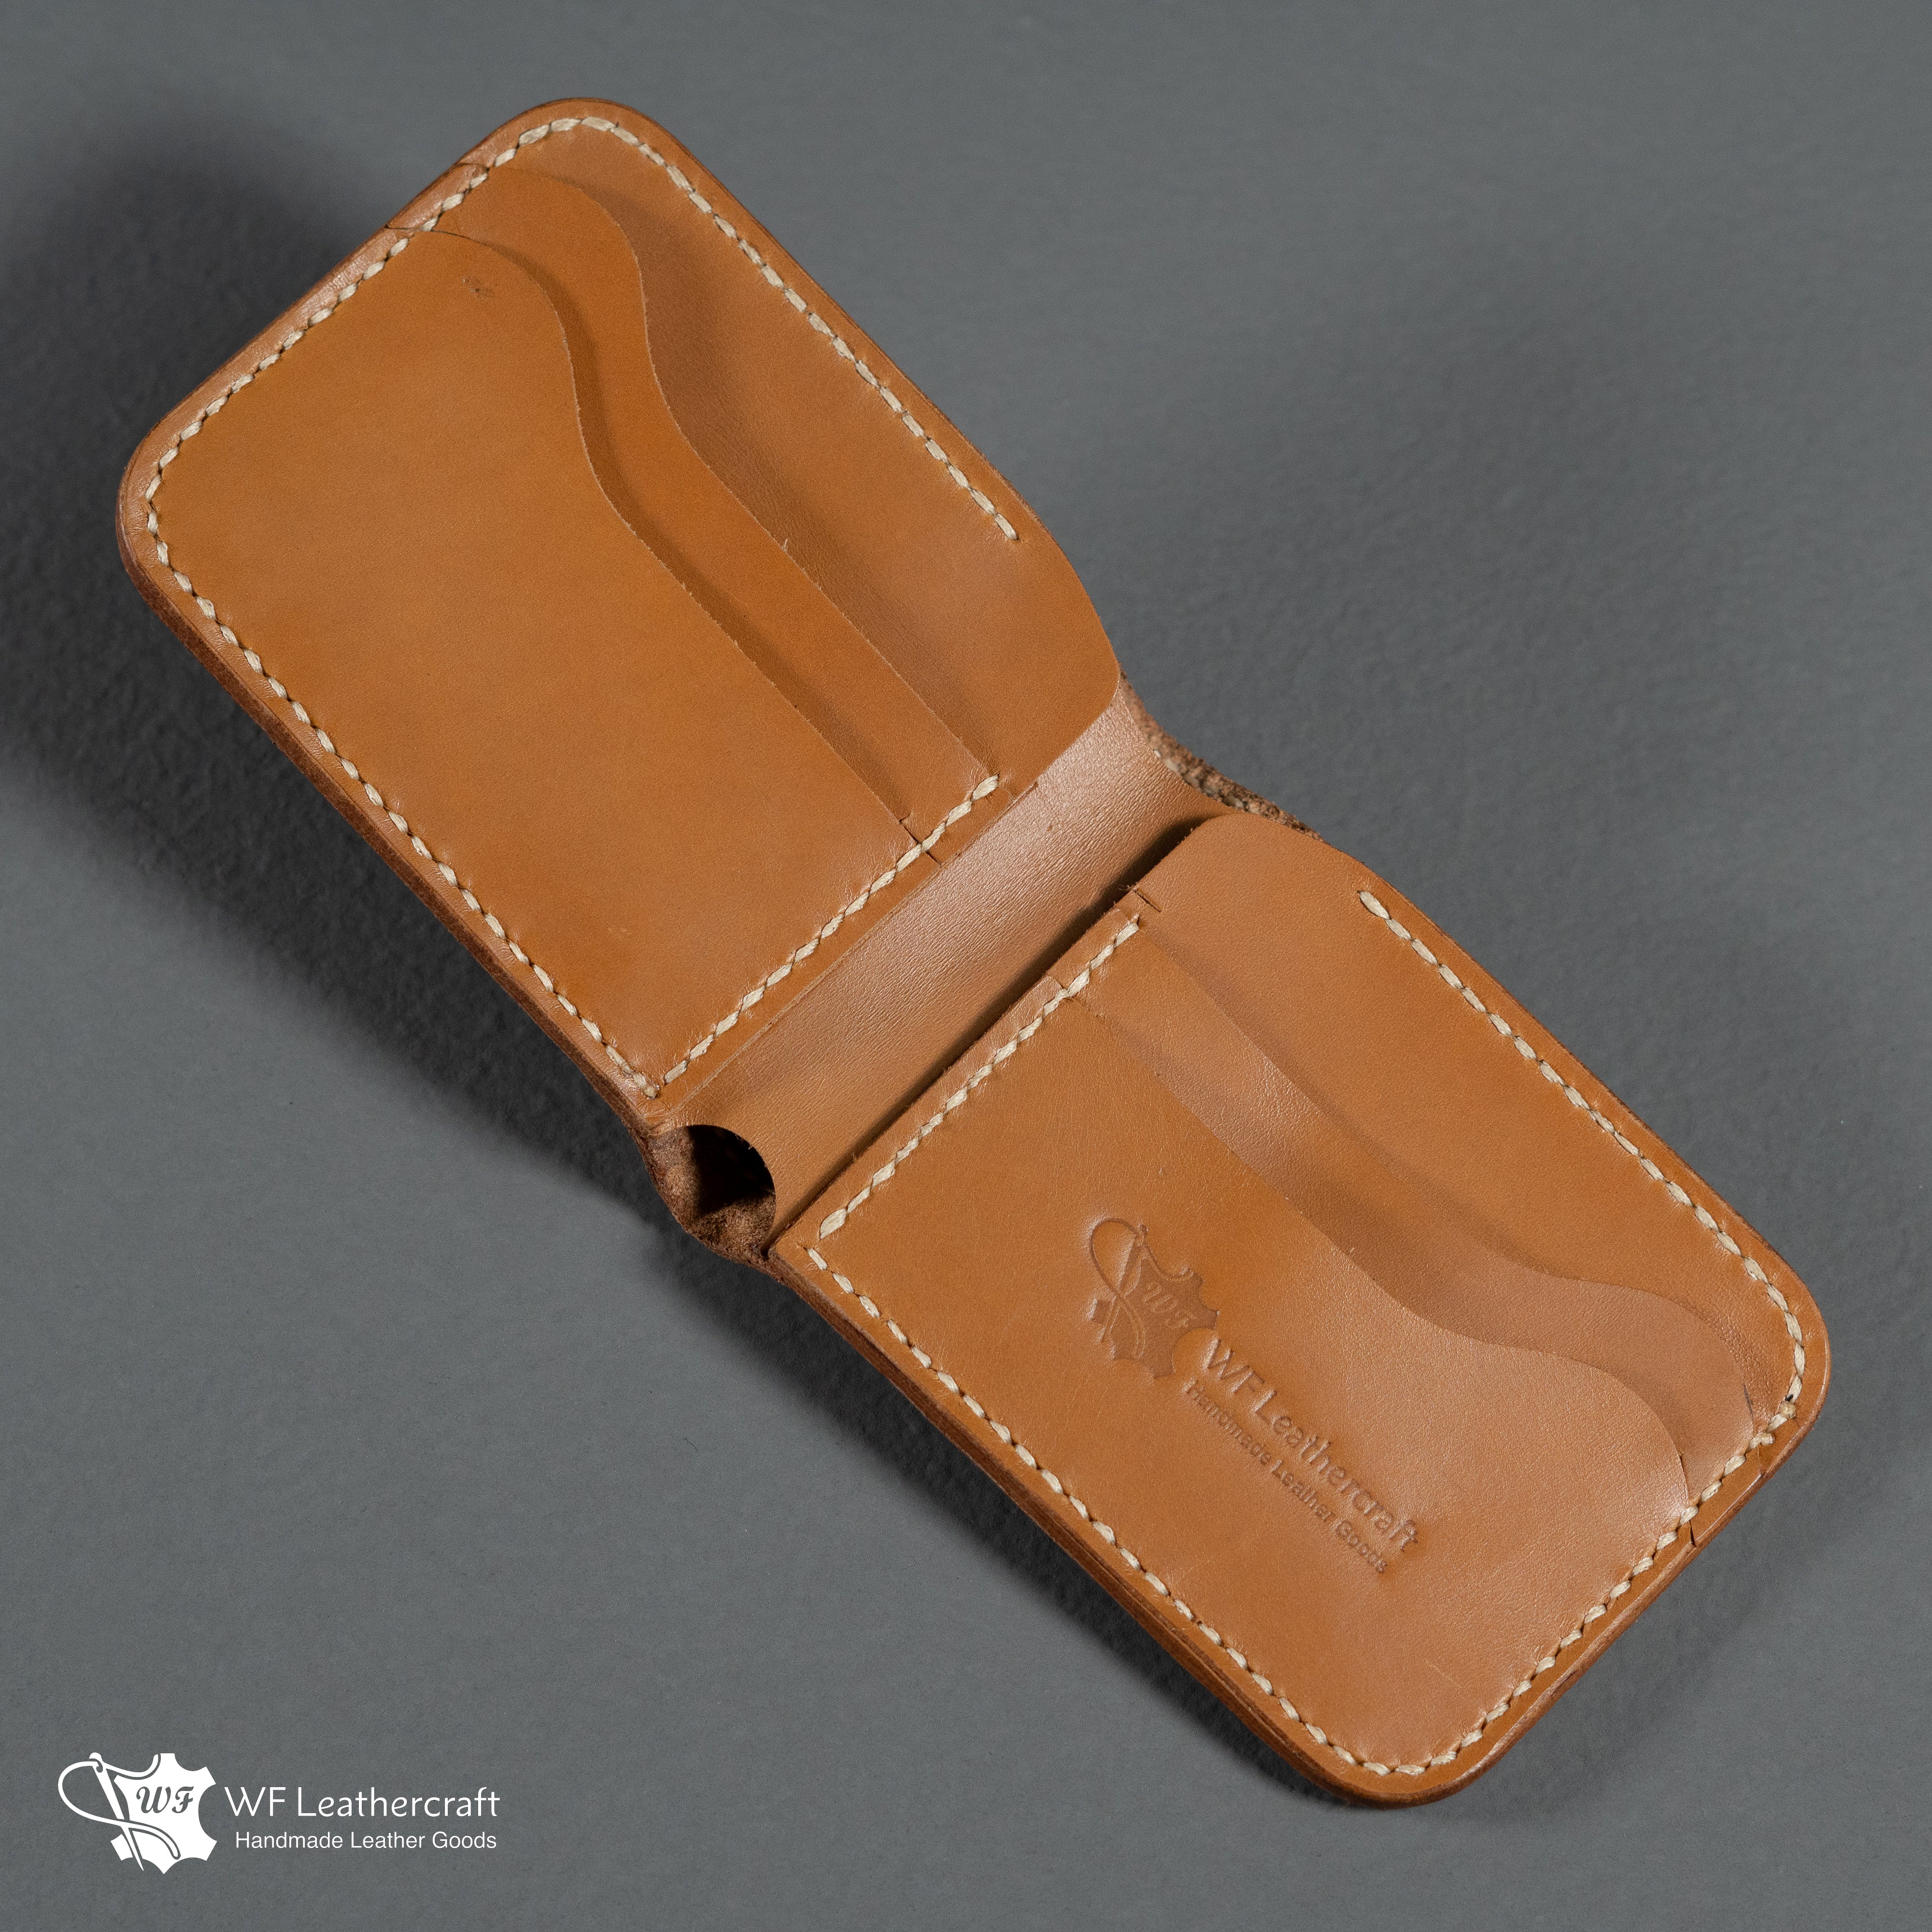 No.55 classic Bifold Leather Wallet (Tan color with crocodile)